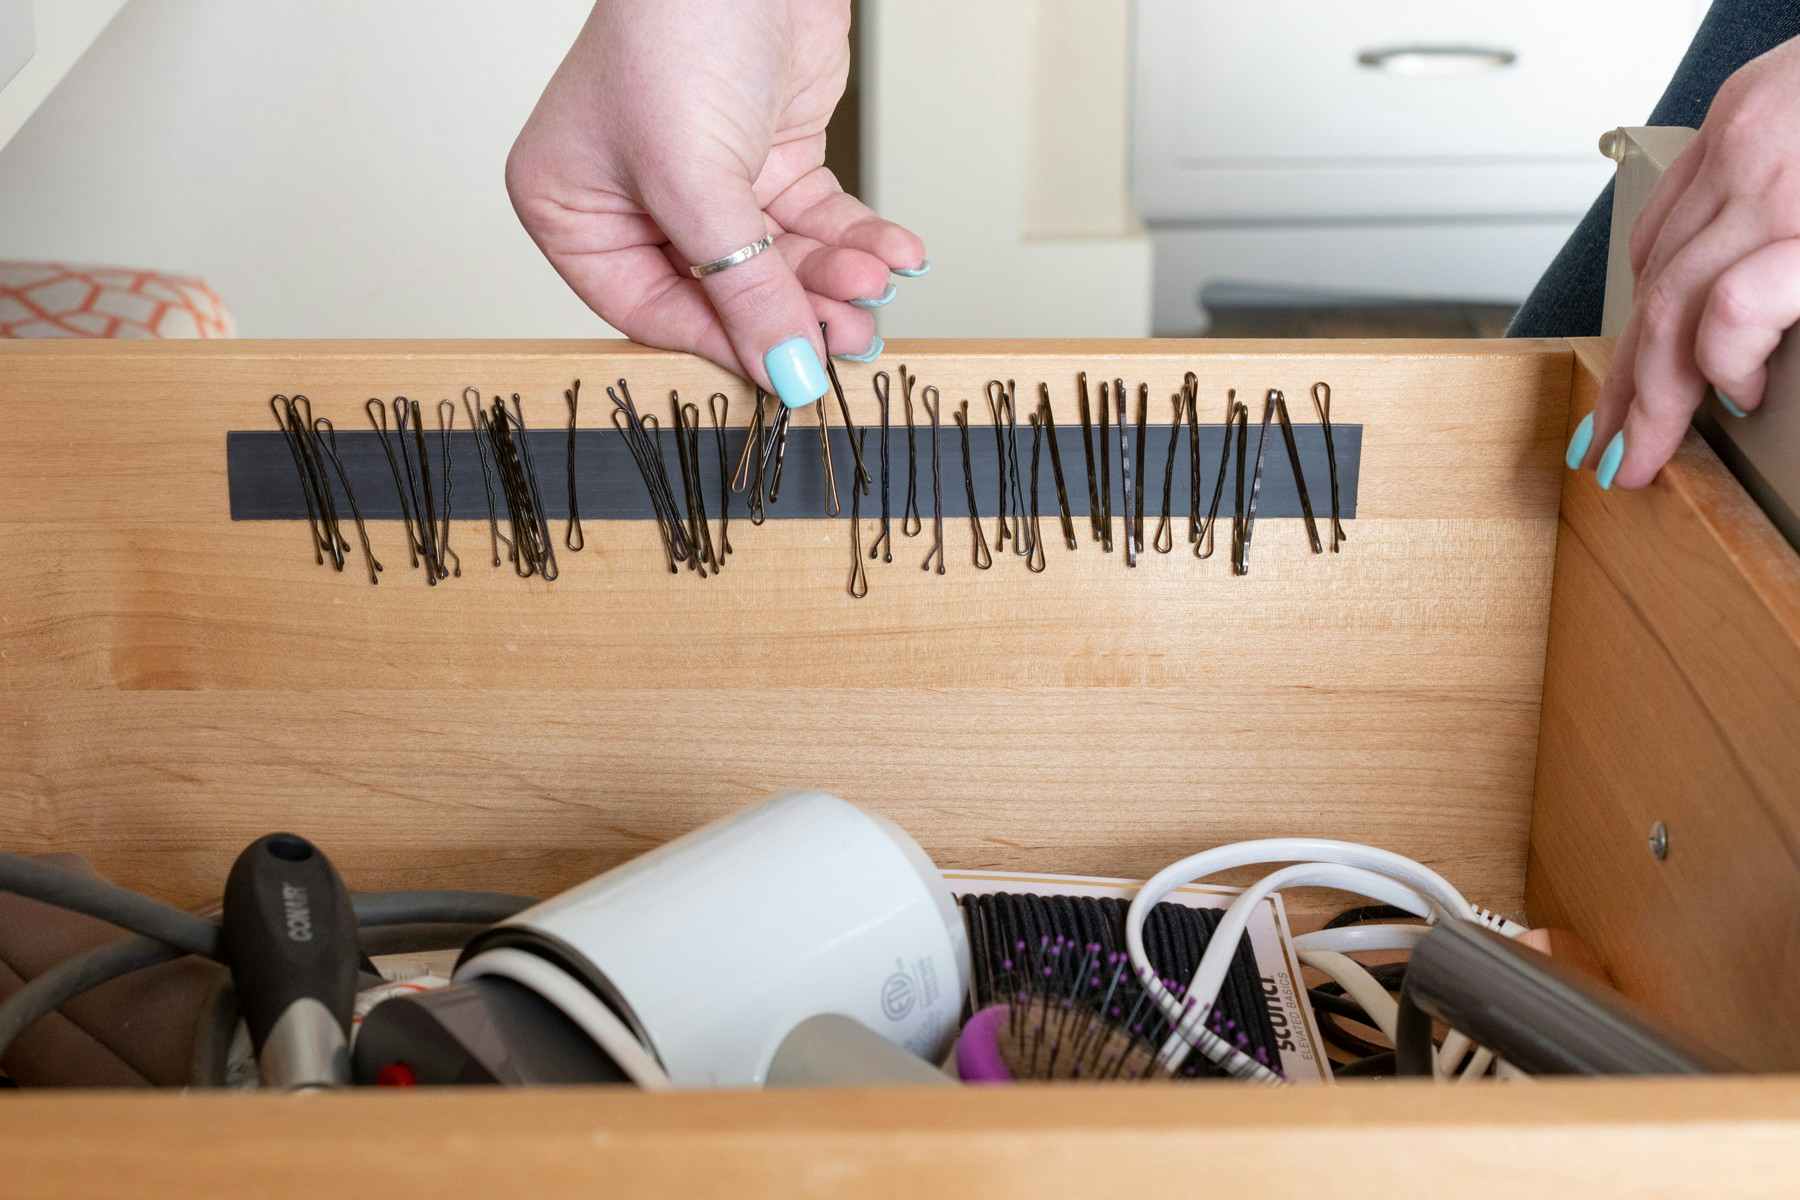 15 Ridiculously simple life hacks to organize your home – SheKnows